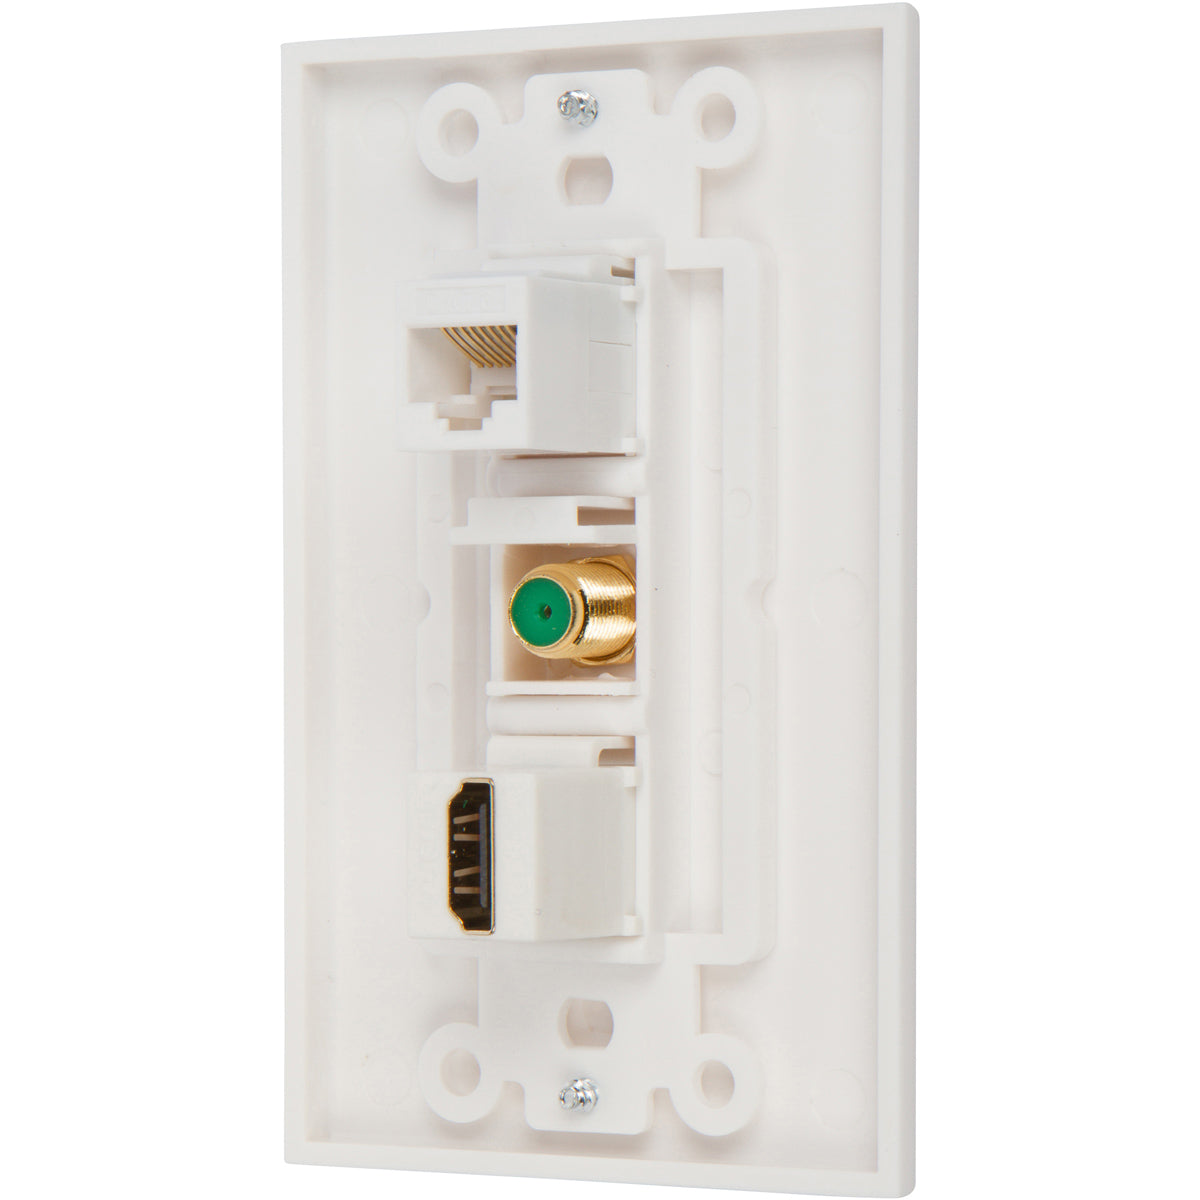 HDMI Coax Ethernet Wall Plate [UL Listed] with Single Gang Low Voltage Mounting Bracket Device (White Kit) - Milena International Inc